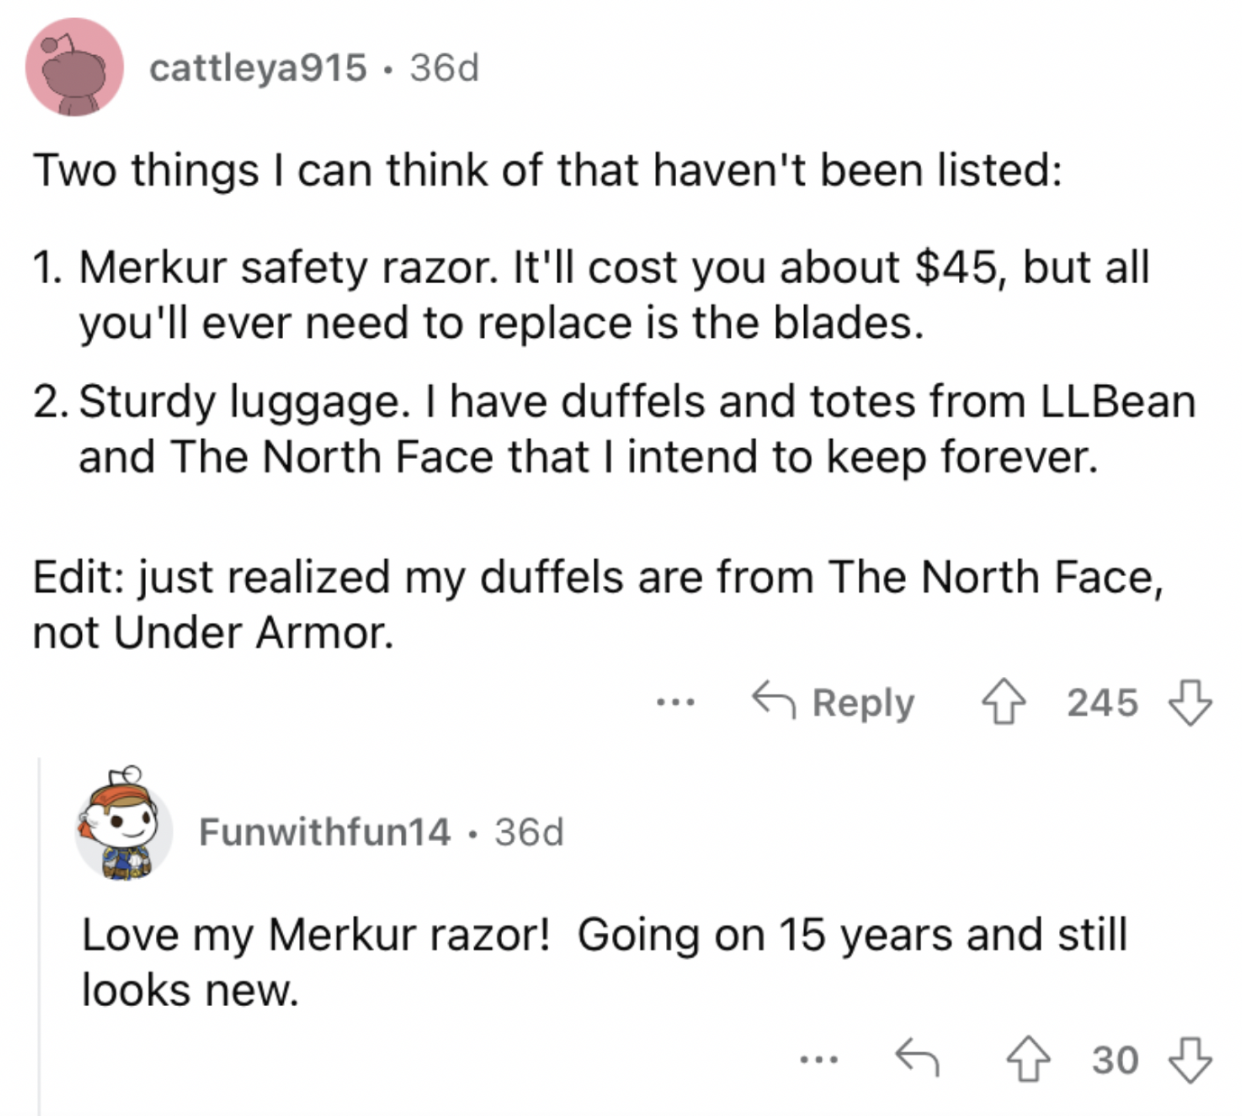 Reddit screenshot about the value of a safety razor and sturdy luggage.